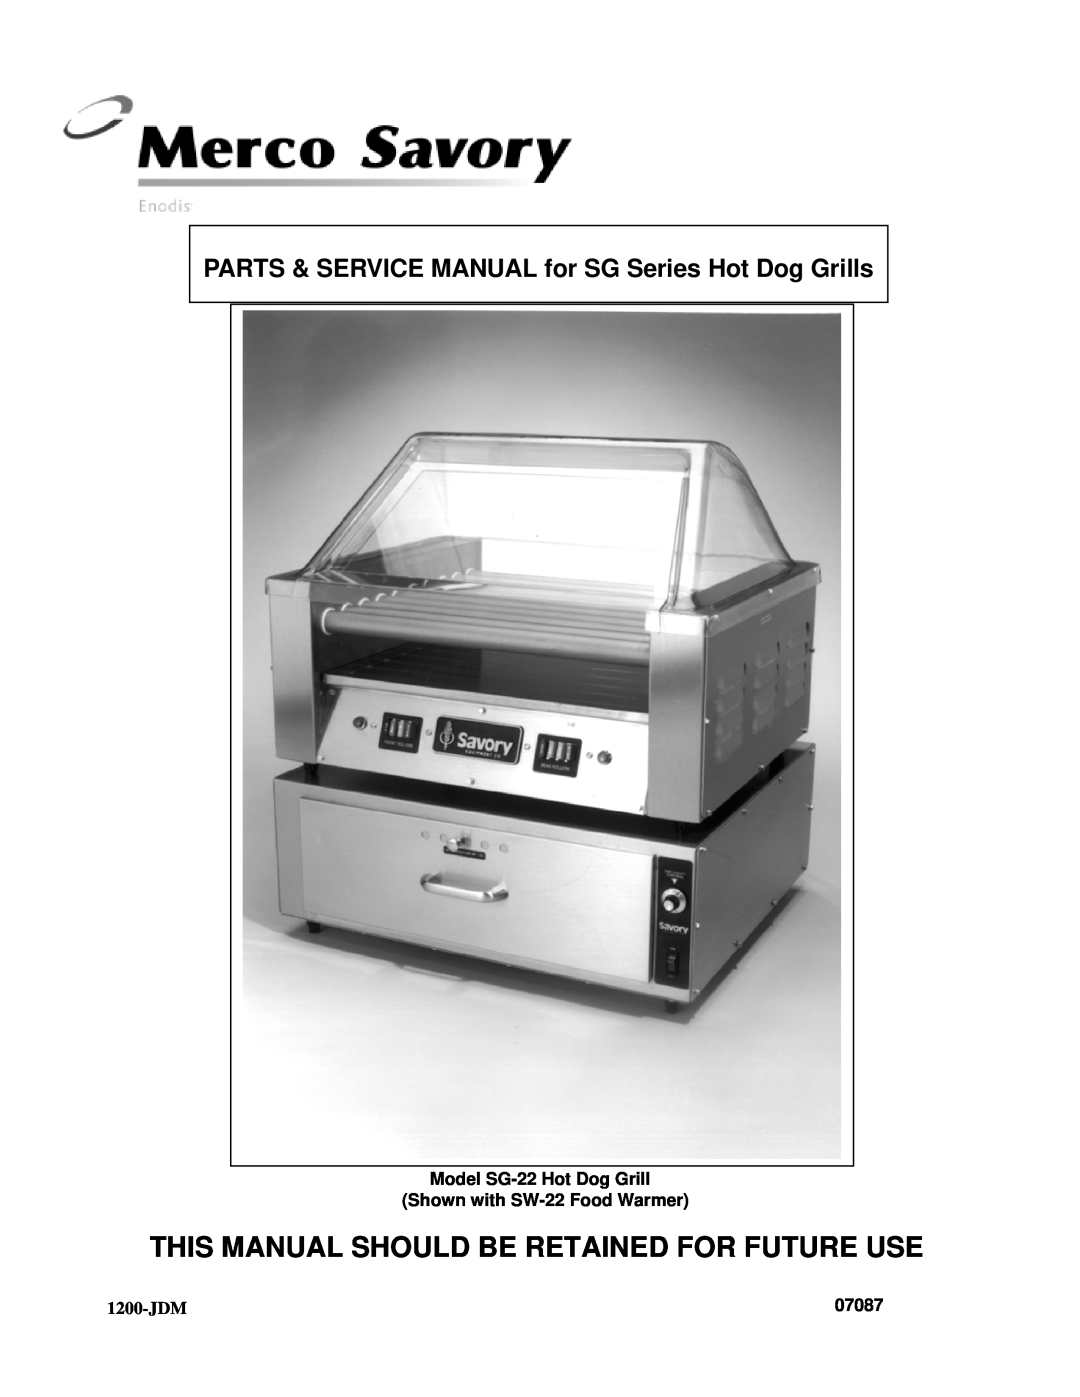 Merco Savory SG-22 service manual 1200-JDM, 07087, This Manual Should Be Retained For Future Use 